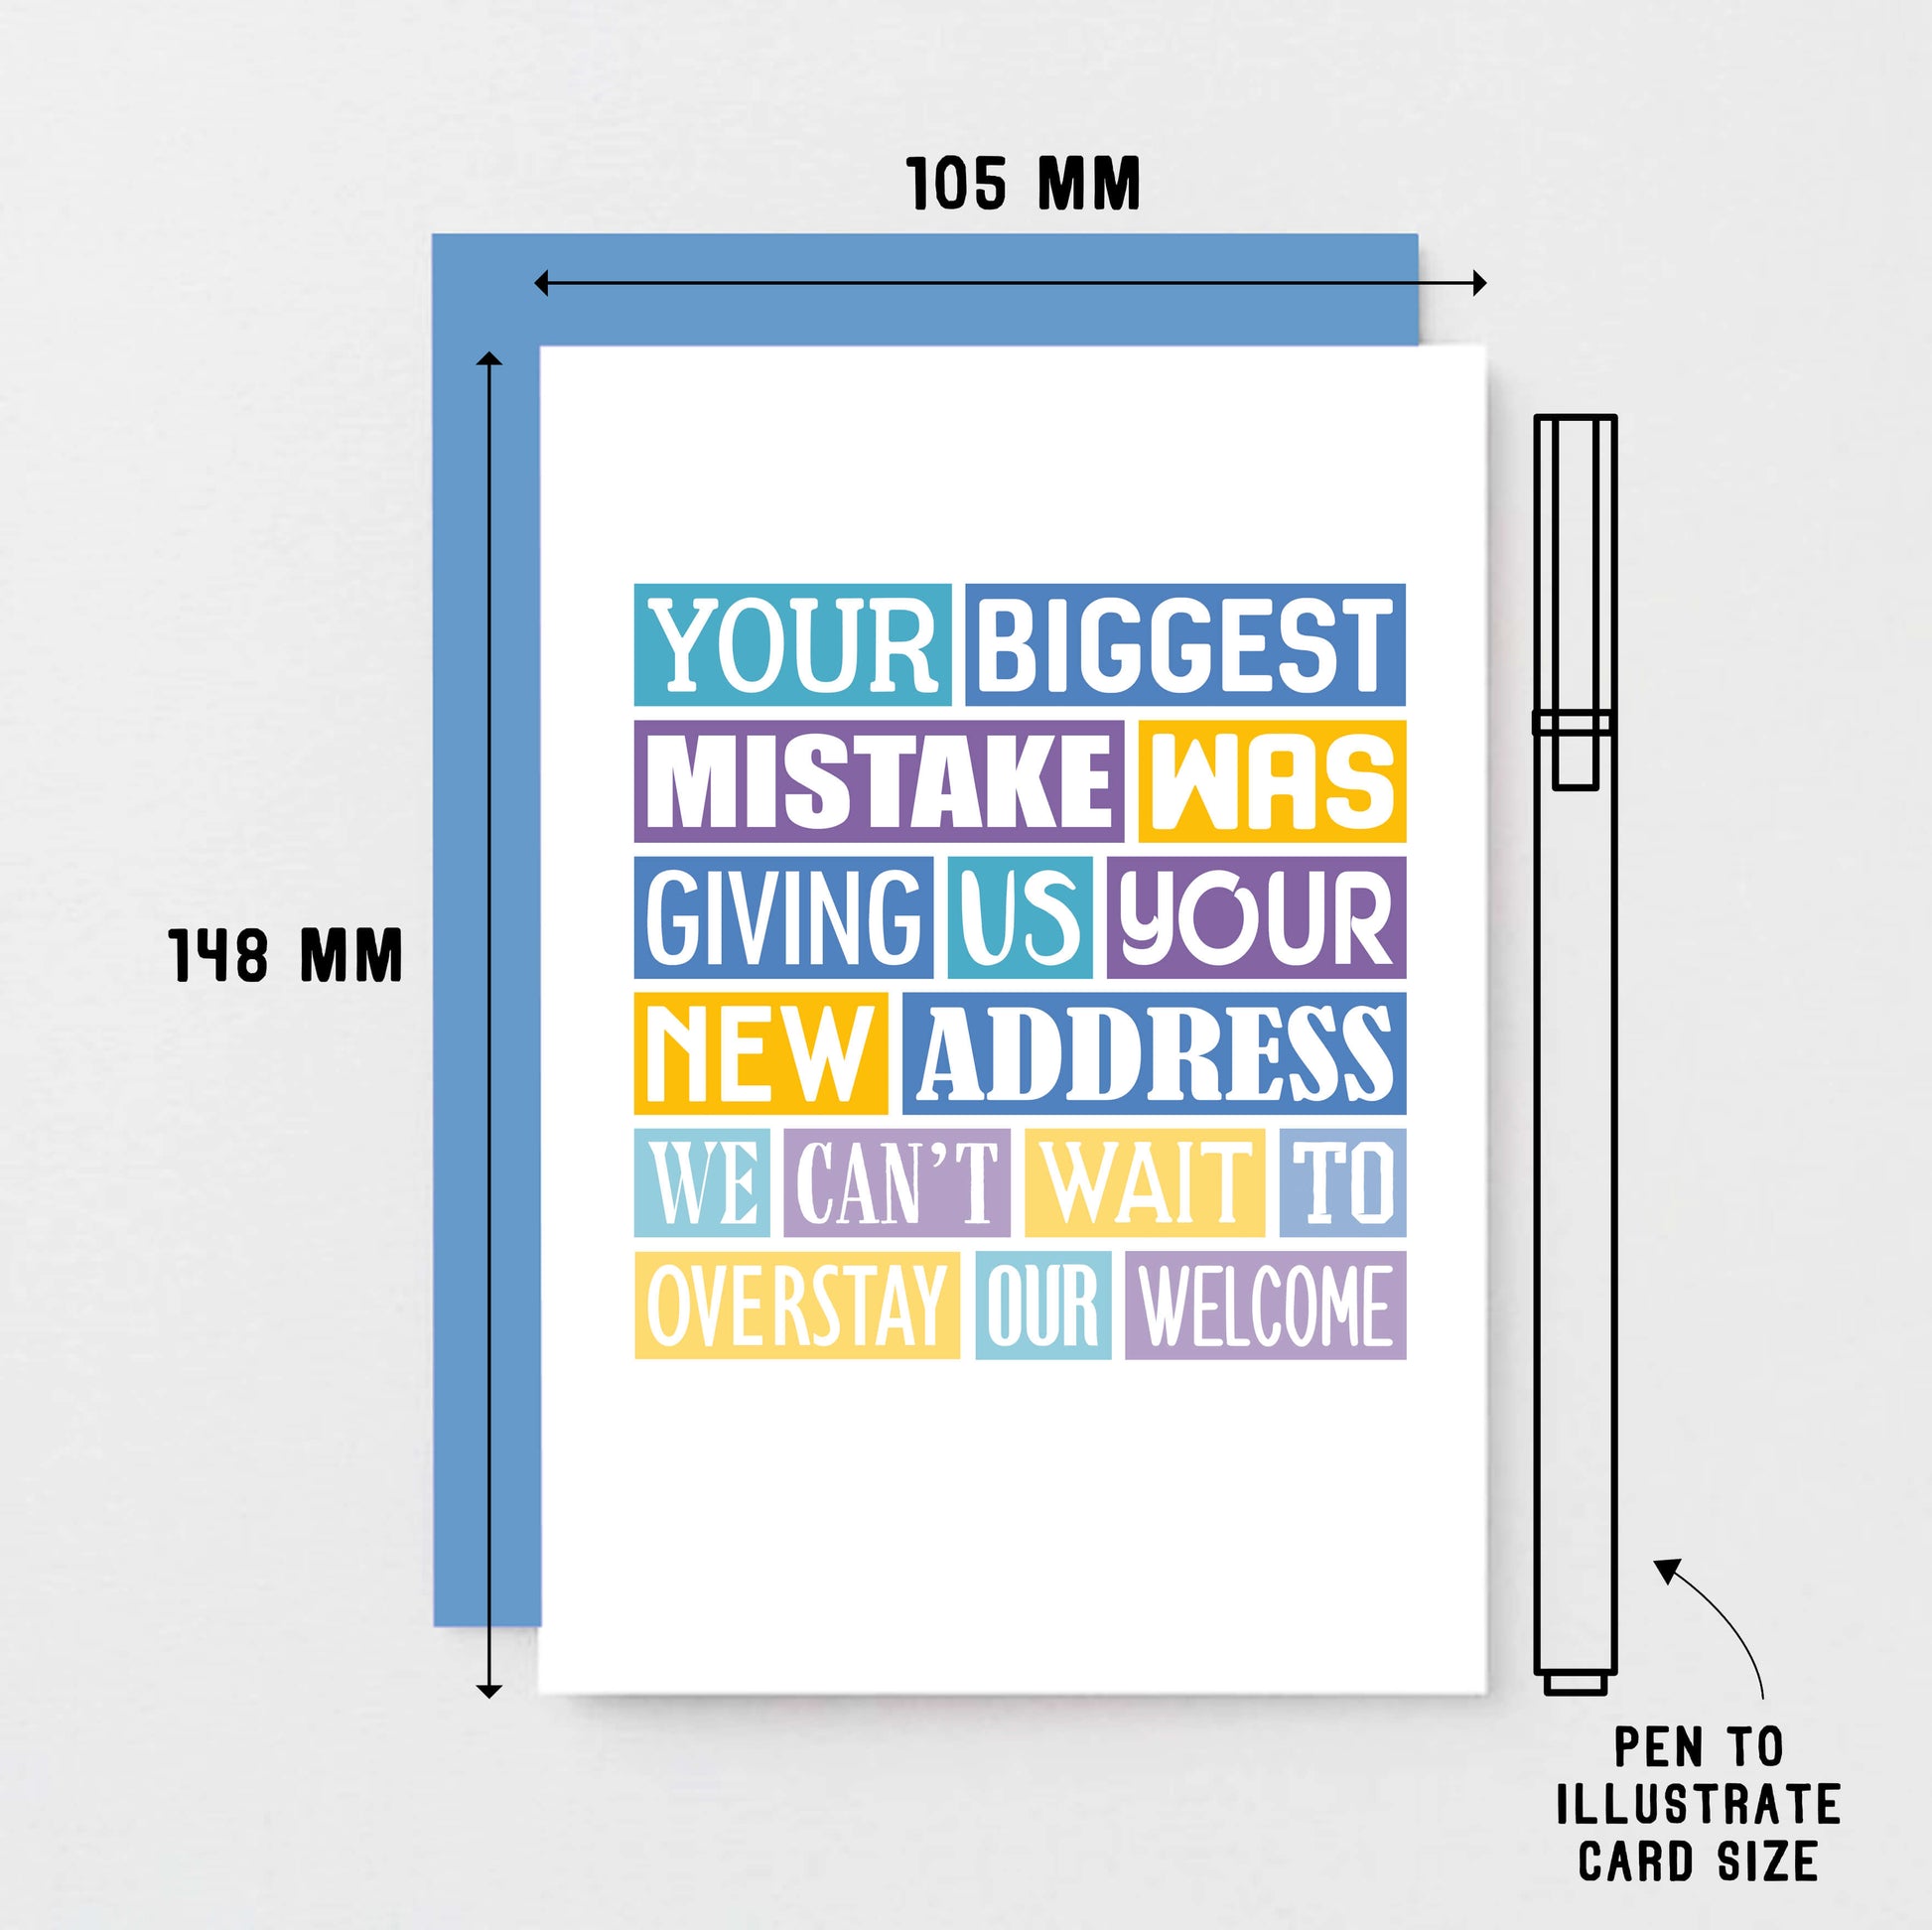 New Home Card by SixElevenCreations. Reads Your biggest mistake was giving us your new address. We can't wait to overstay our welcome. Product Code SE0316A6